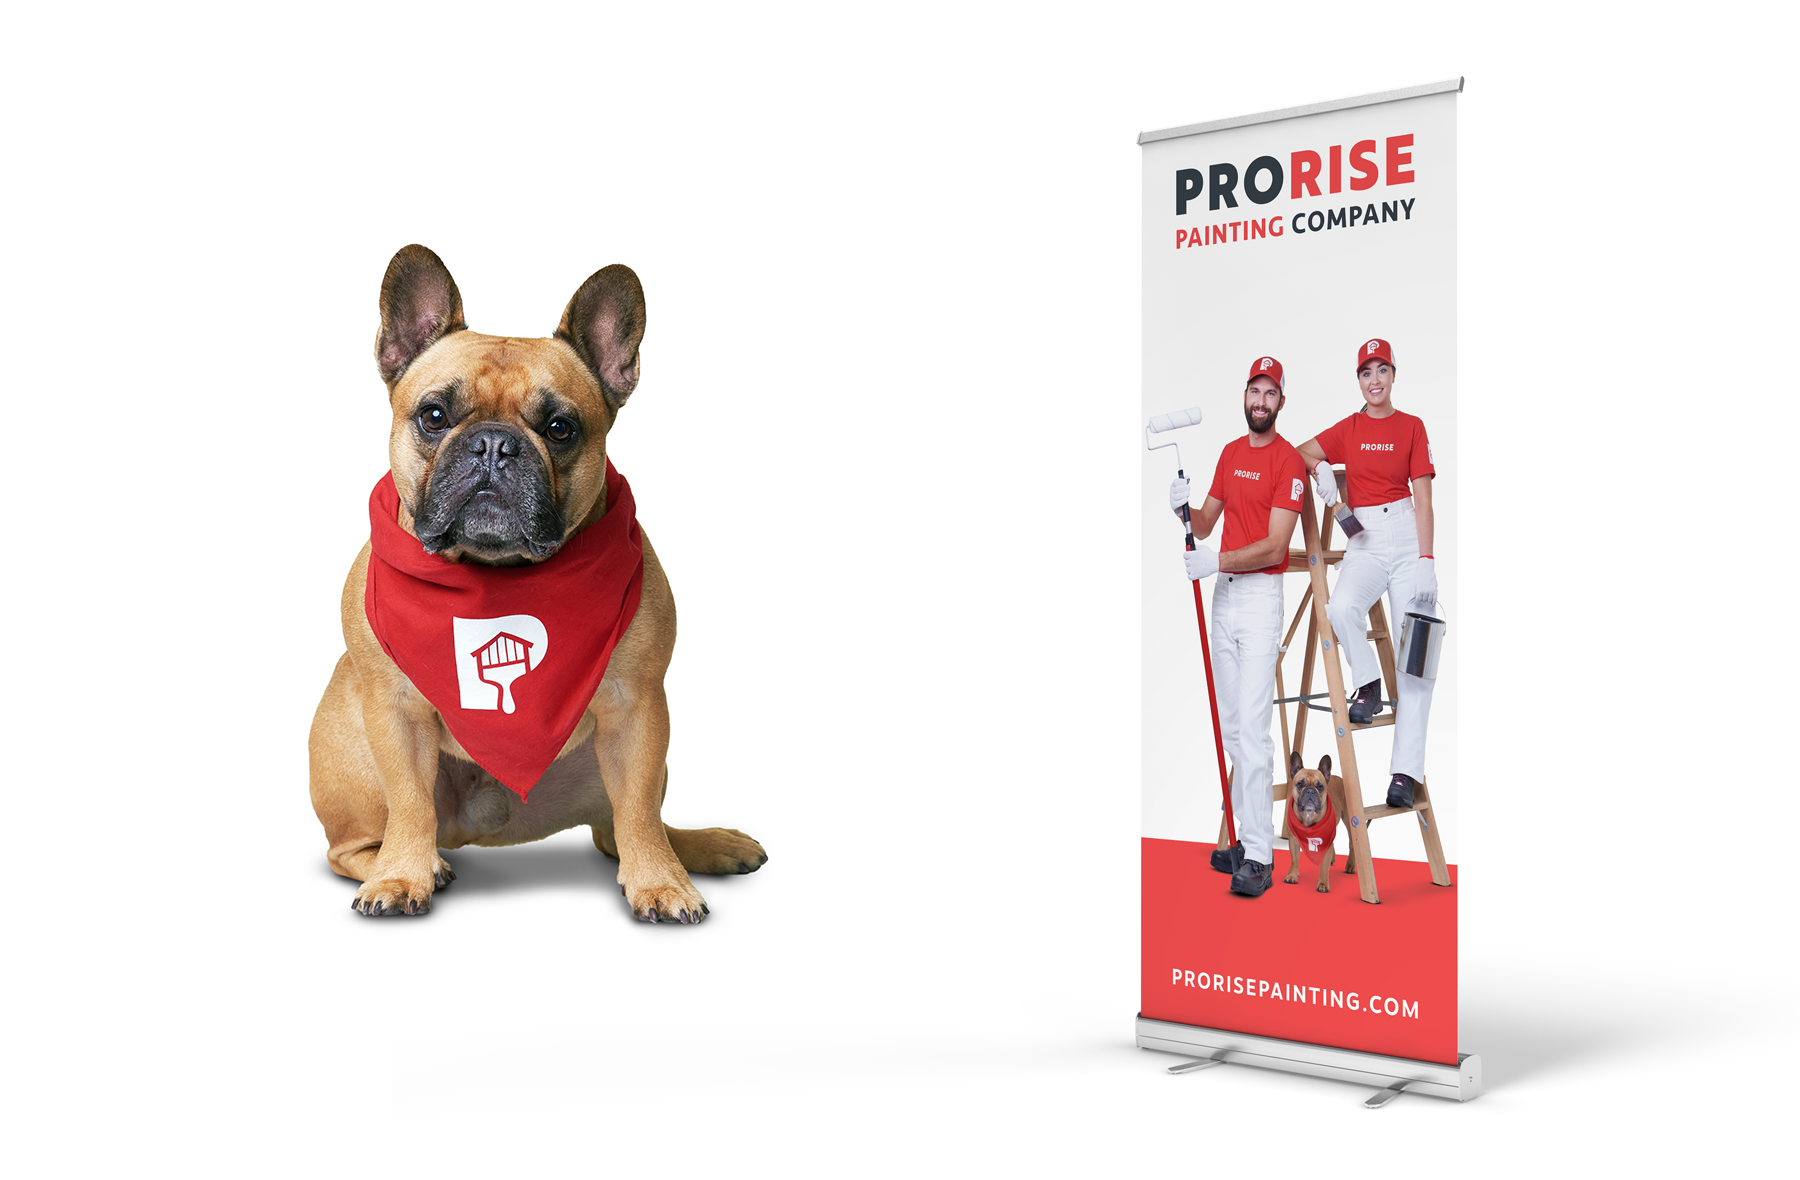 ProRise Painting Banner and Toby the Dog with a Bandana